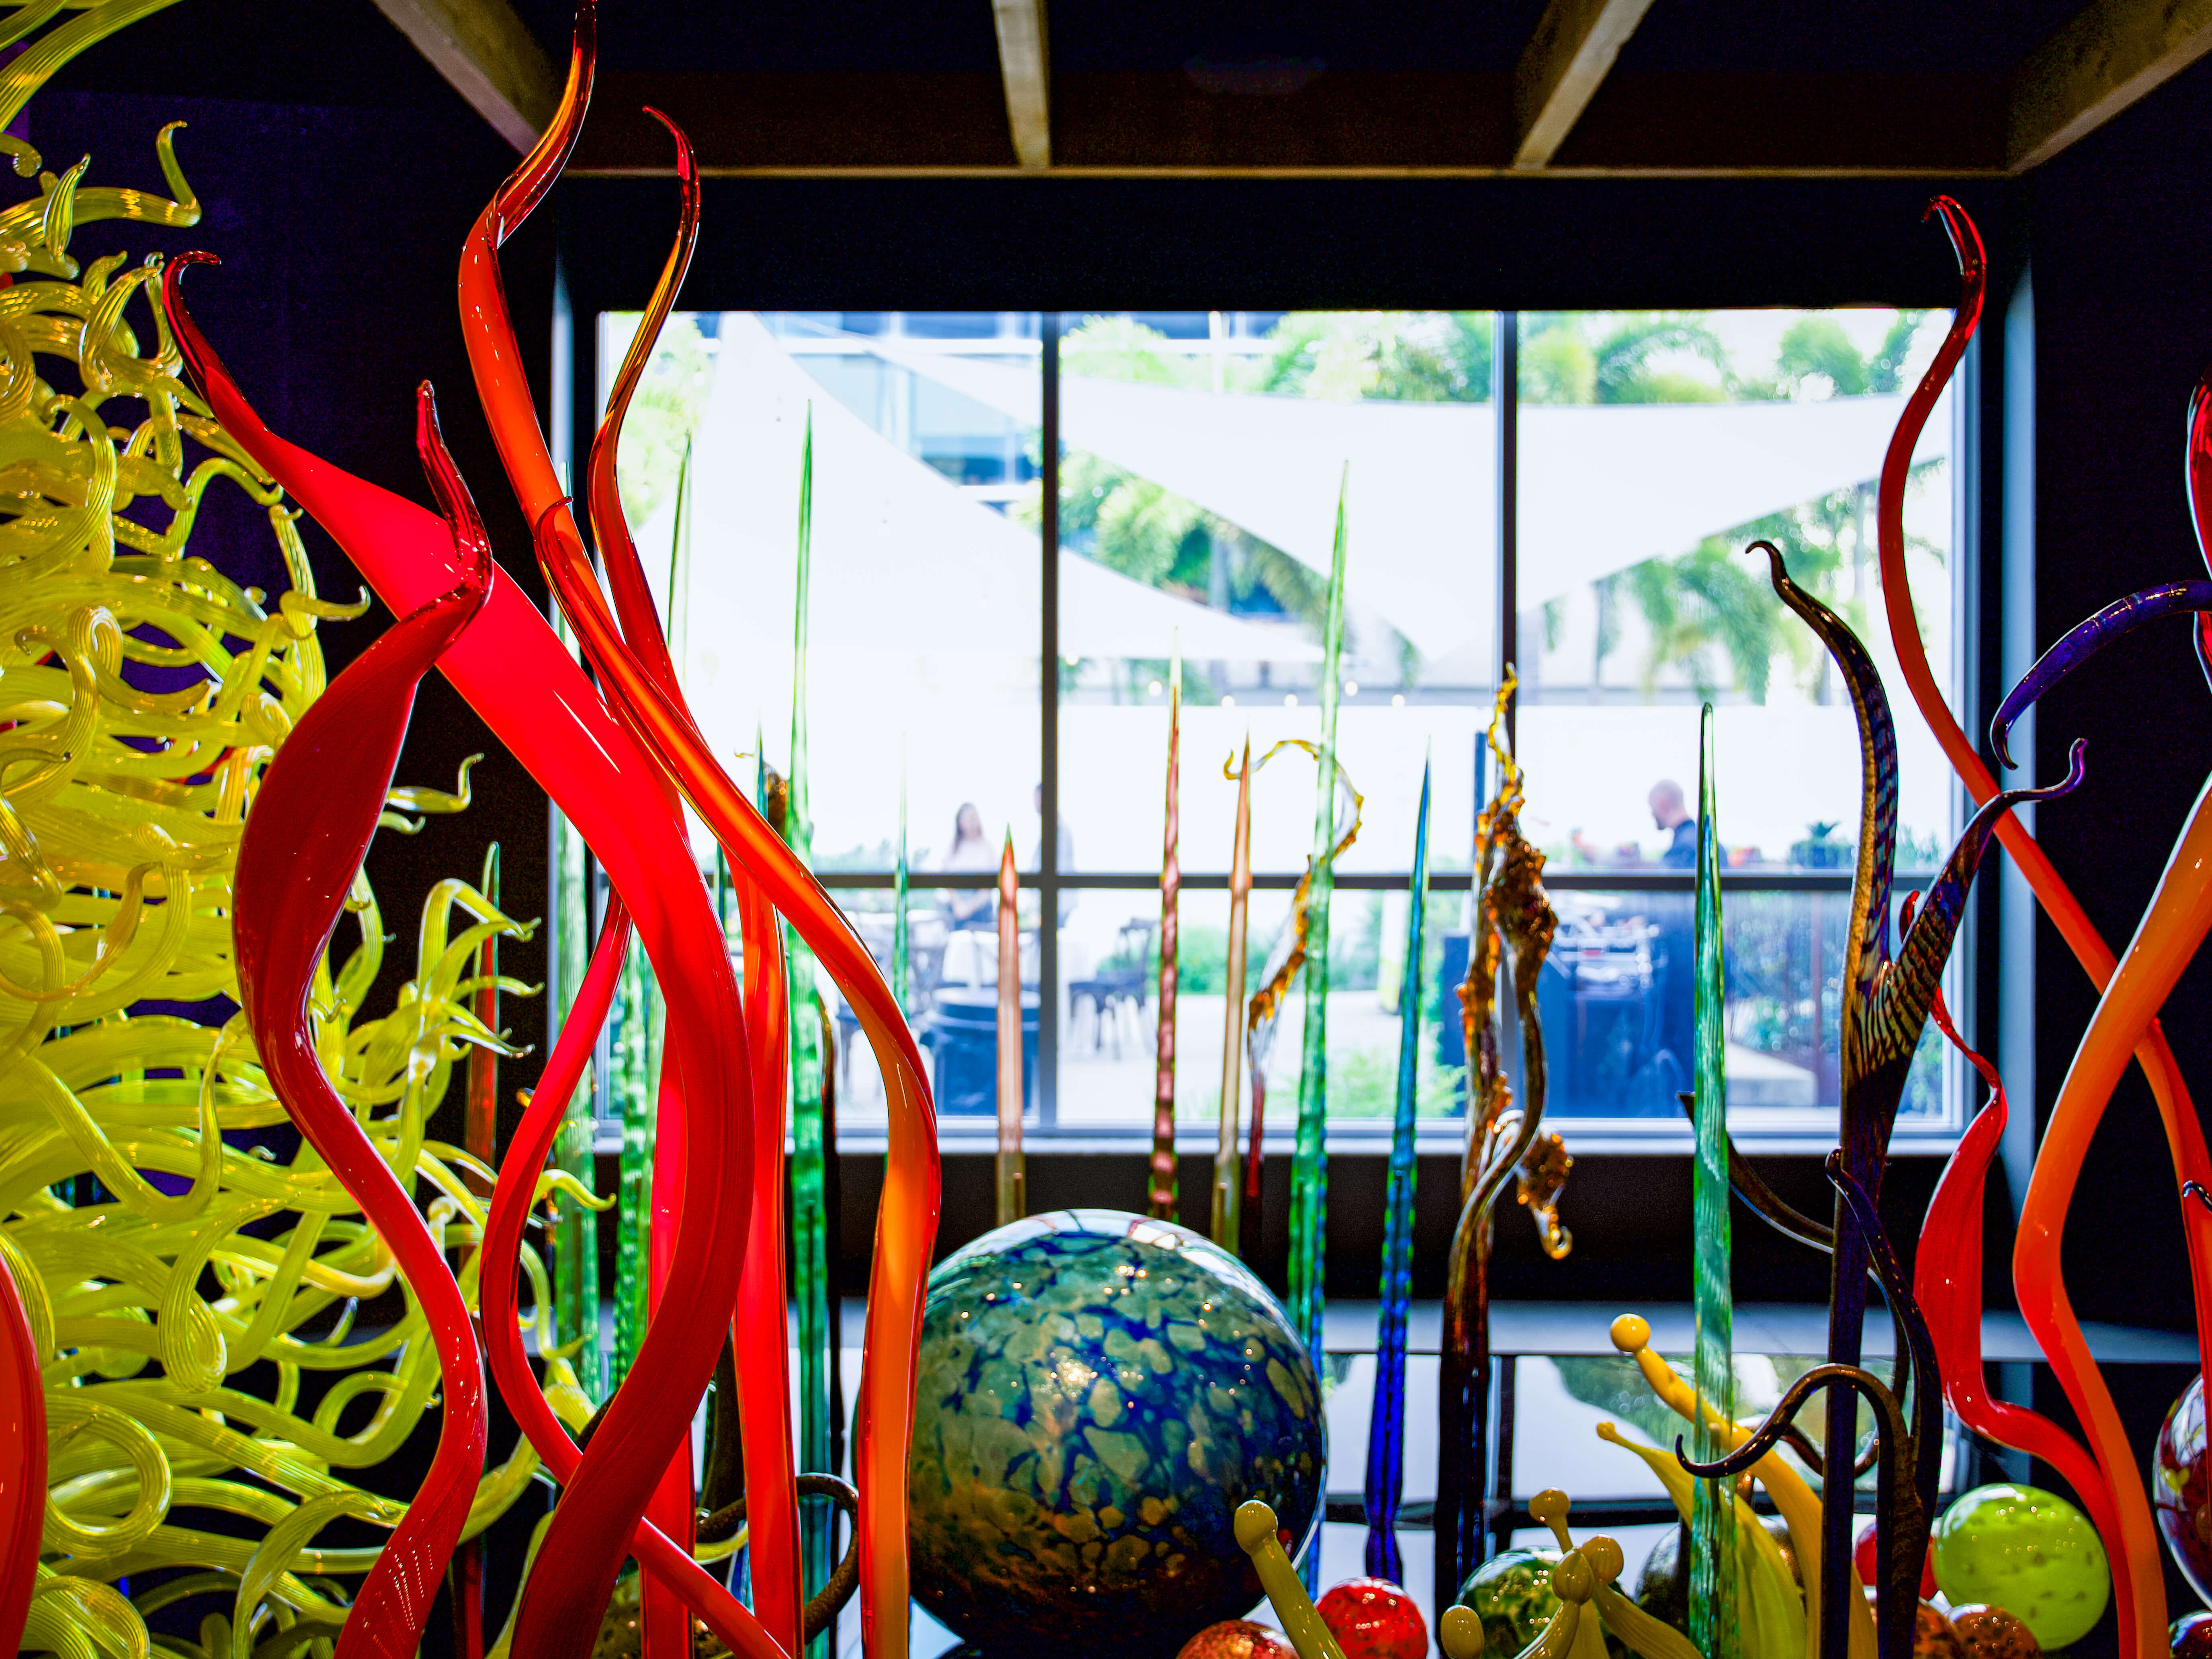 From the Chihuly Museum looking out at the Chamber Community Connect Event Space